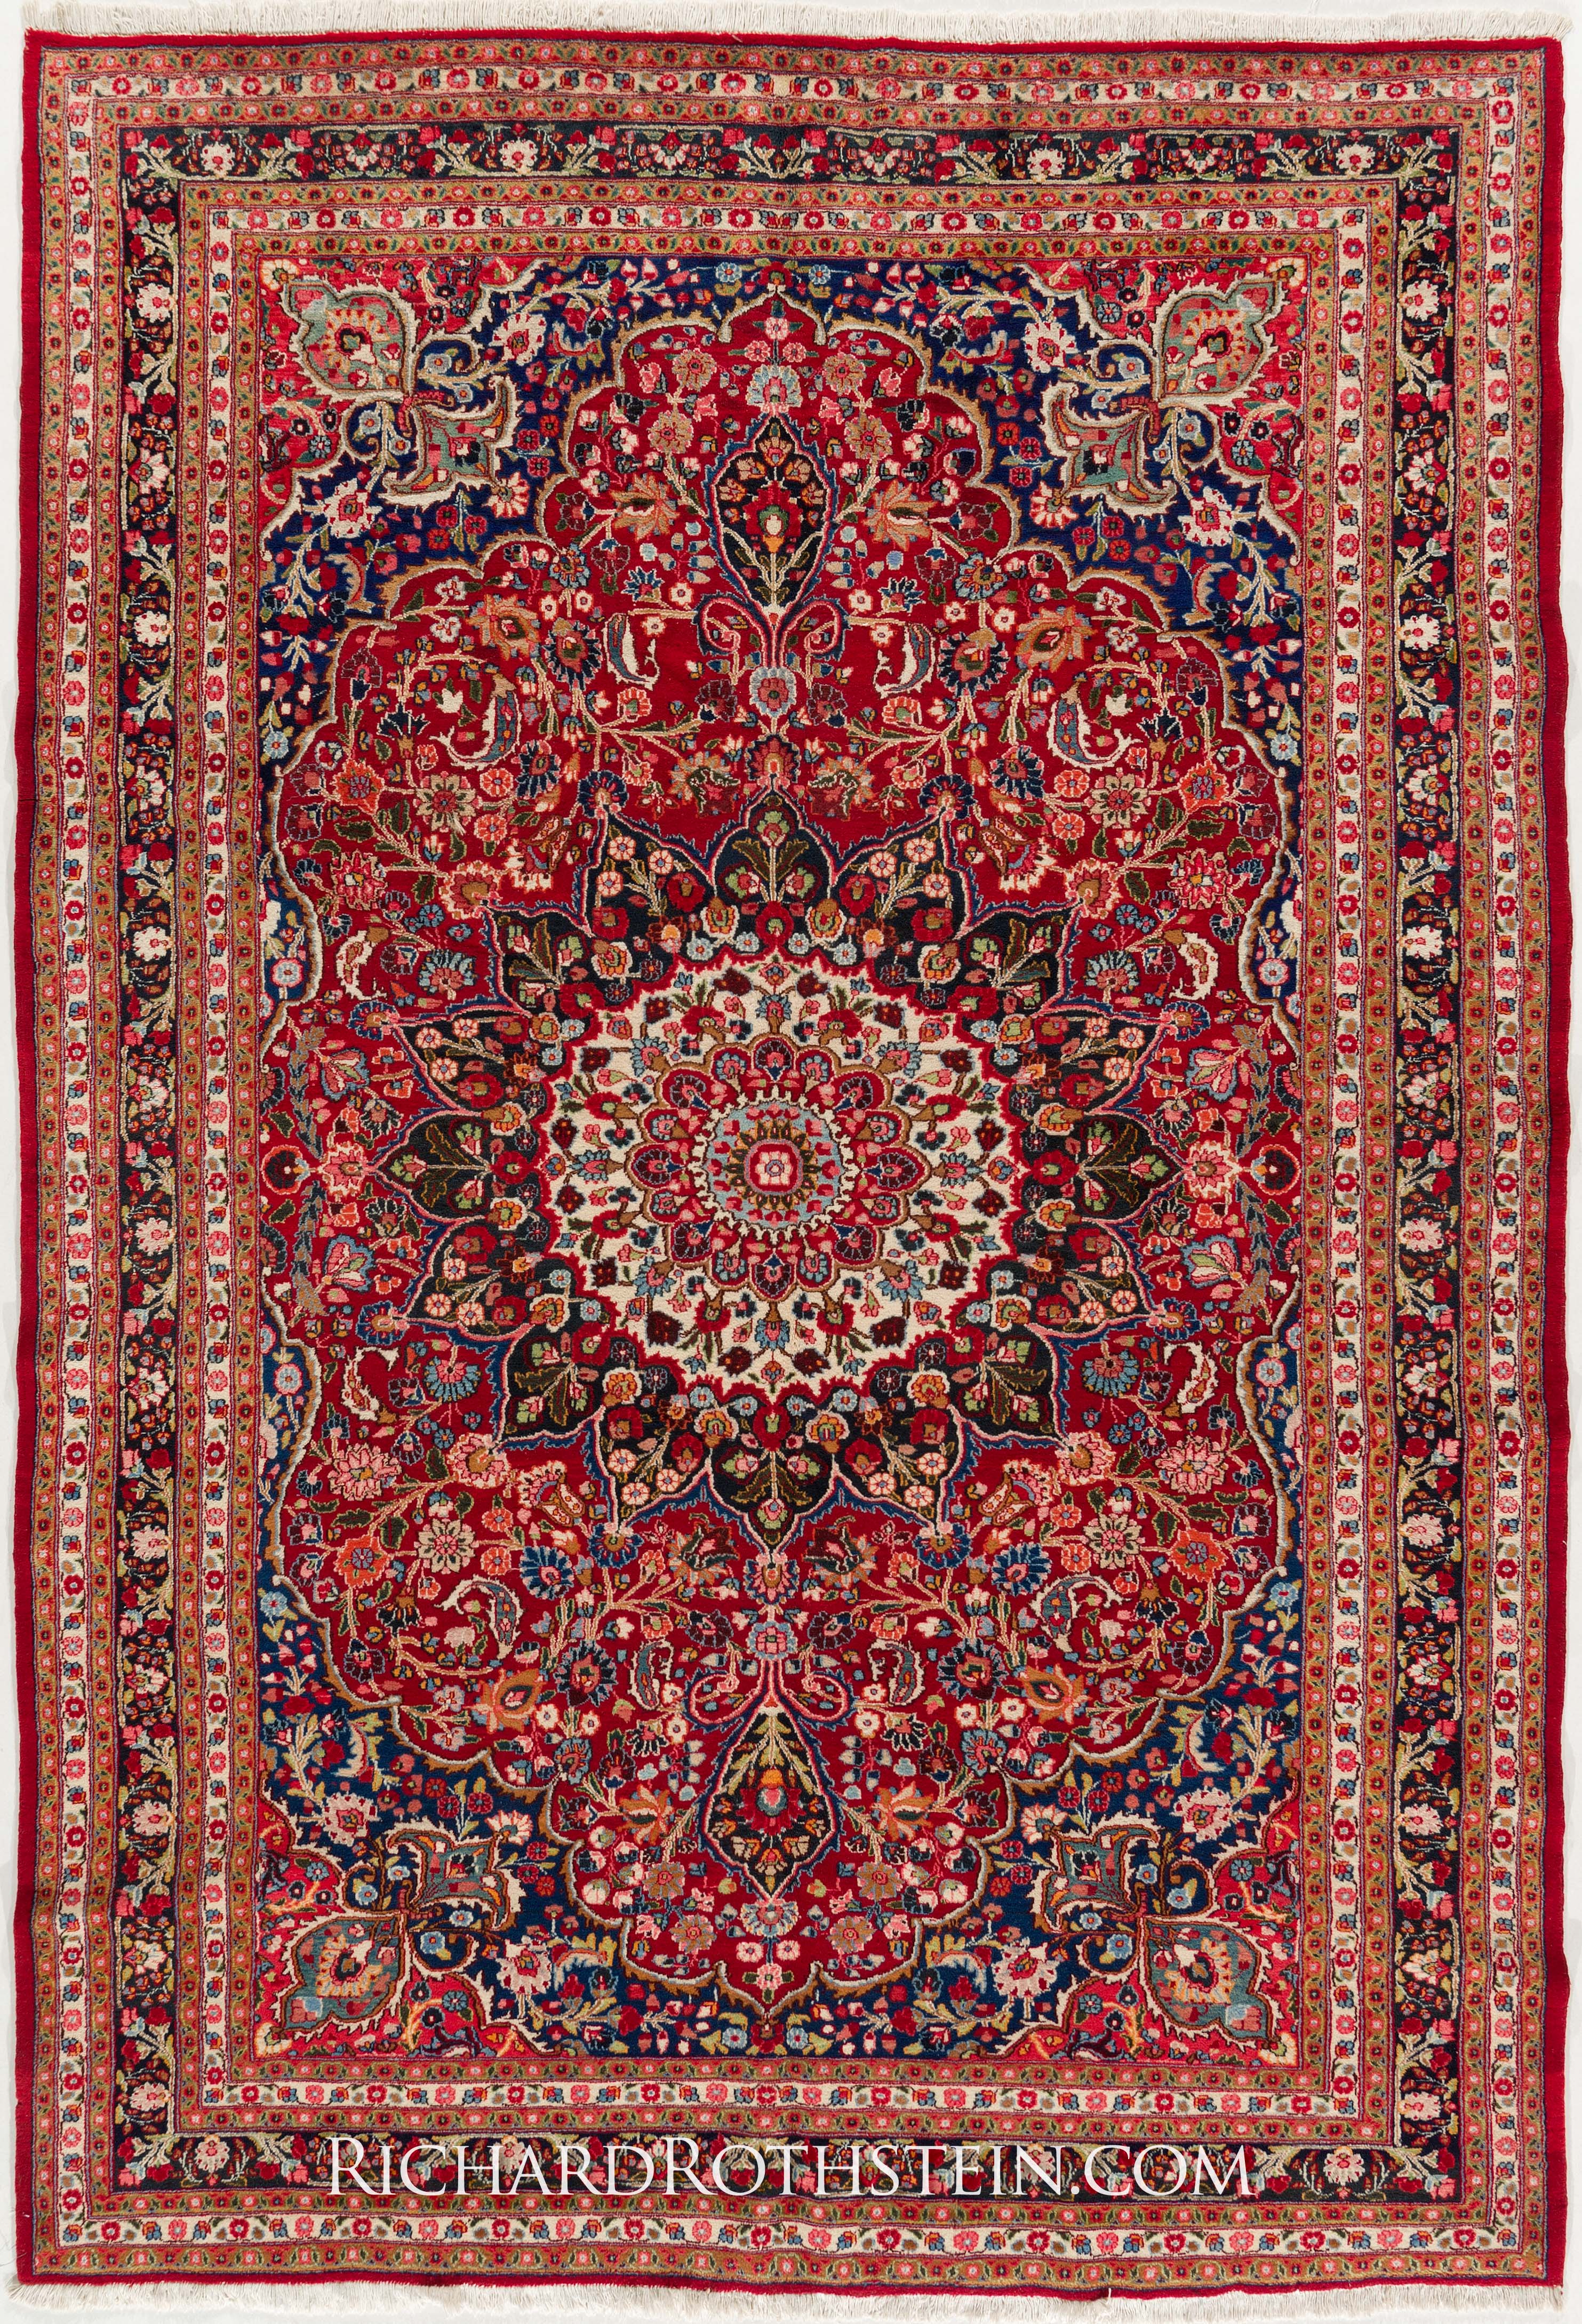 Oriental carpets buy a precious possession of your home to be the envy of others - Persian carpet WGNEDSN